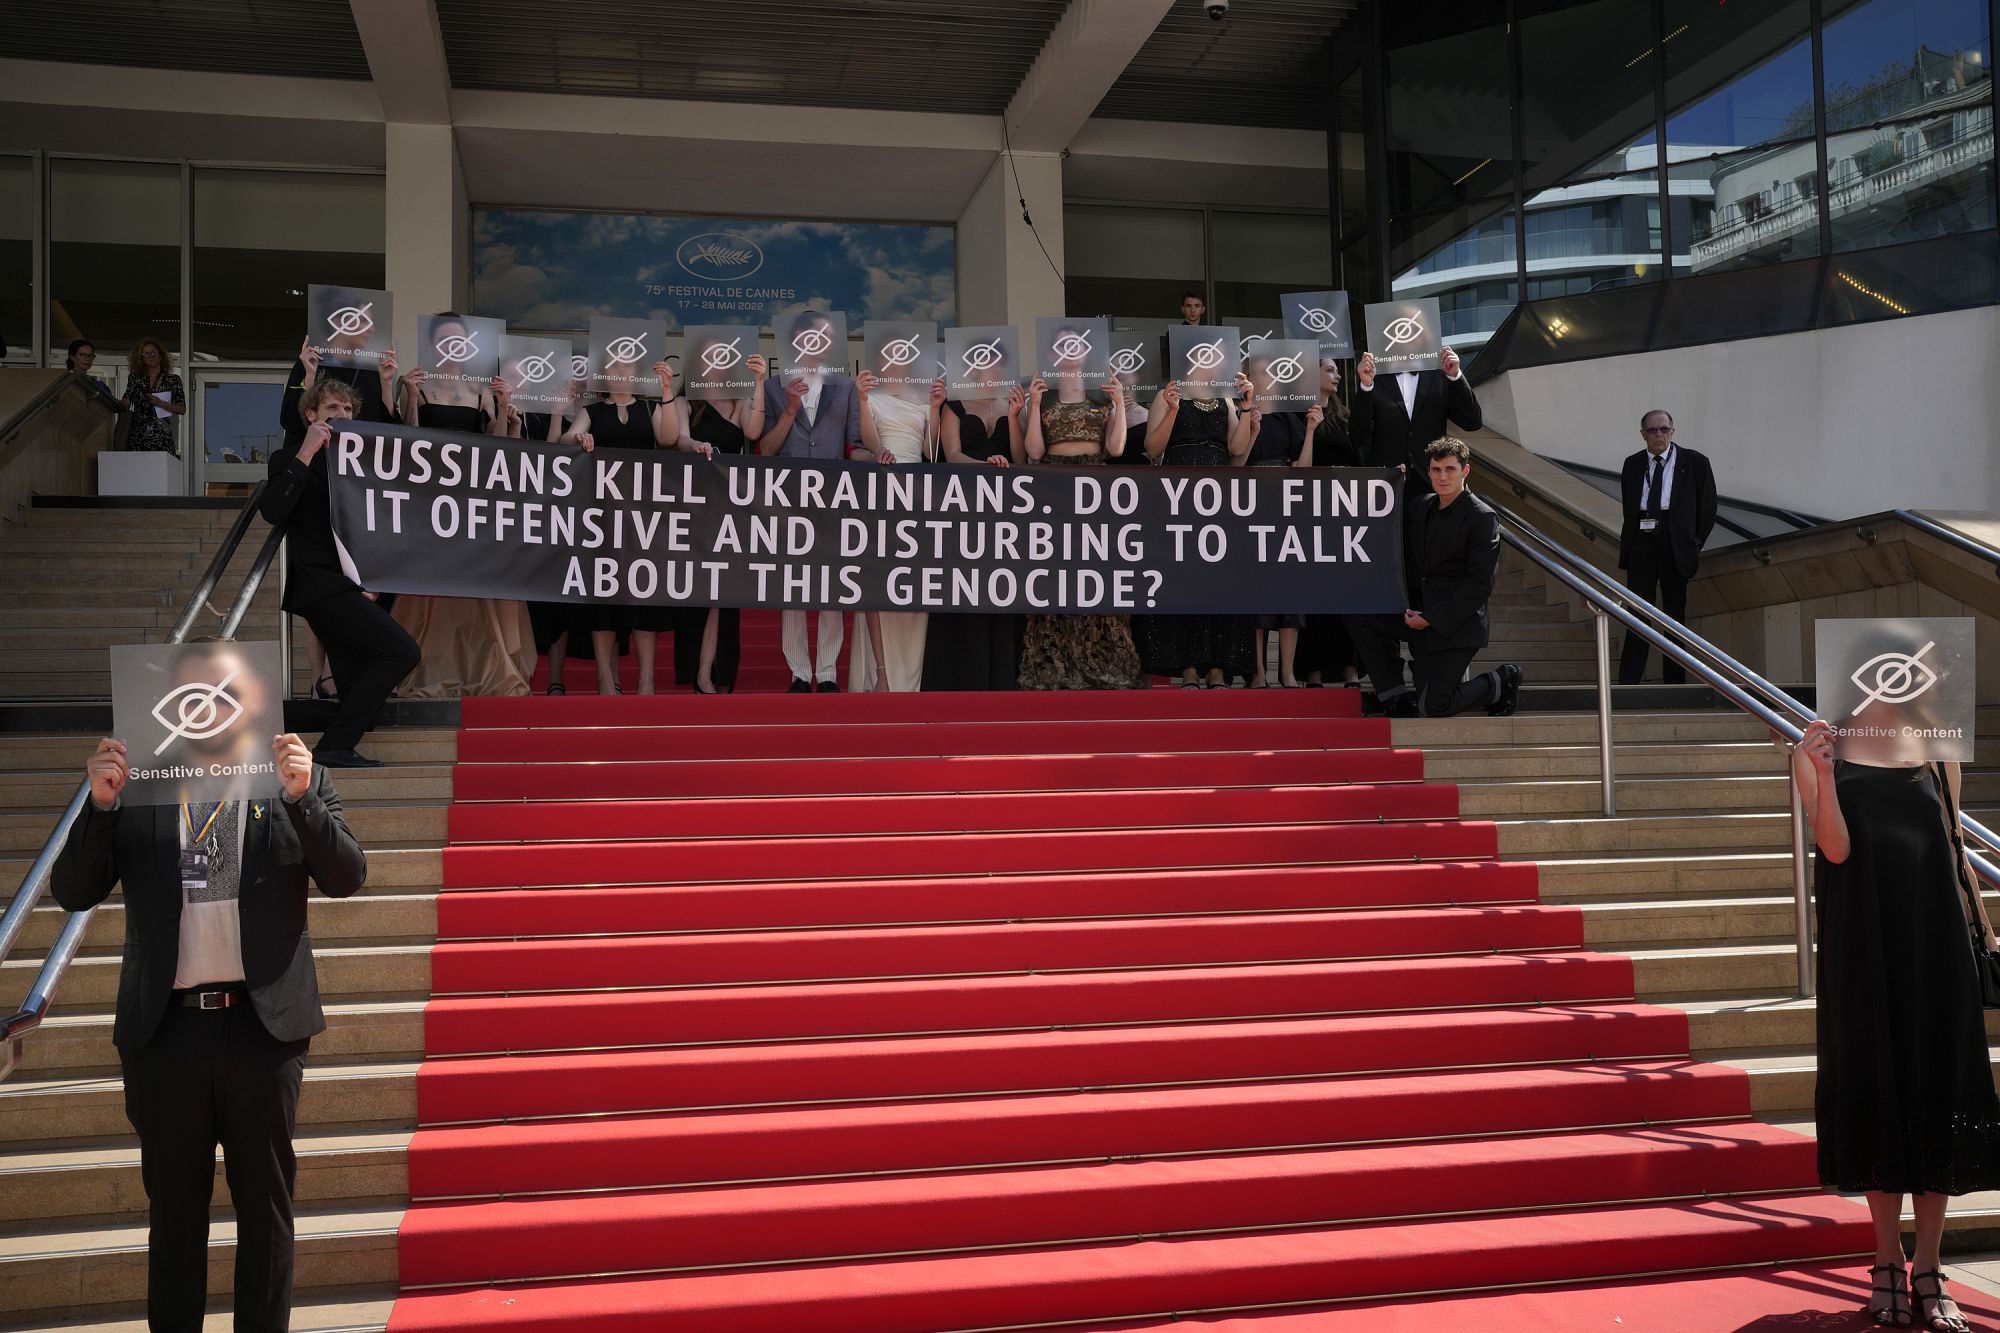 Topless Woman Removed From Cannes Red Carpet After Pro-Ukraine